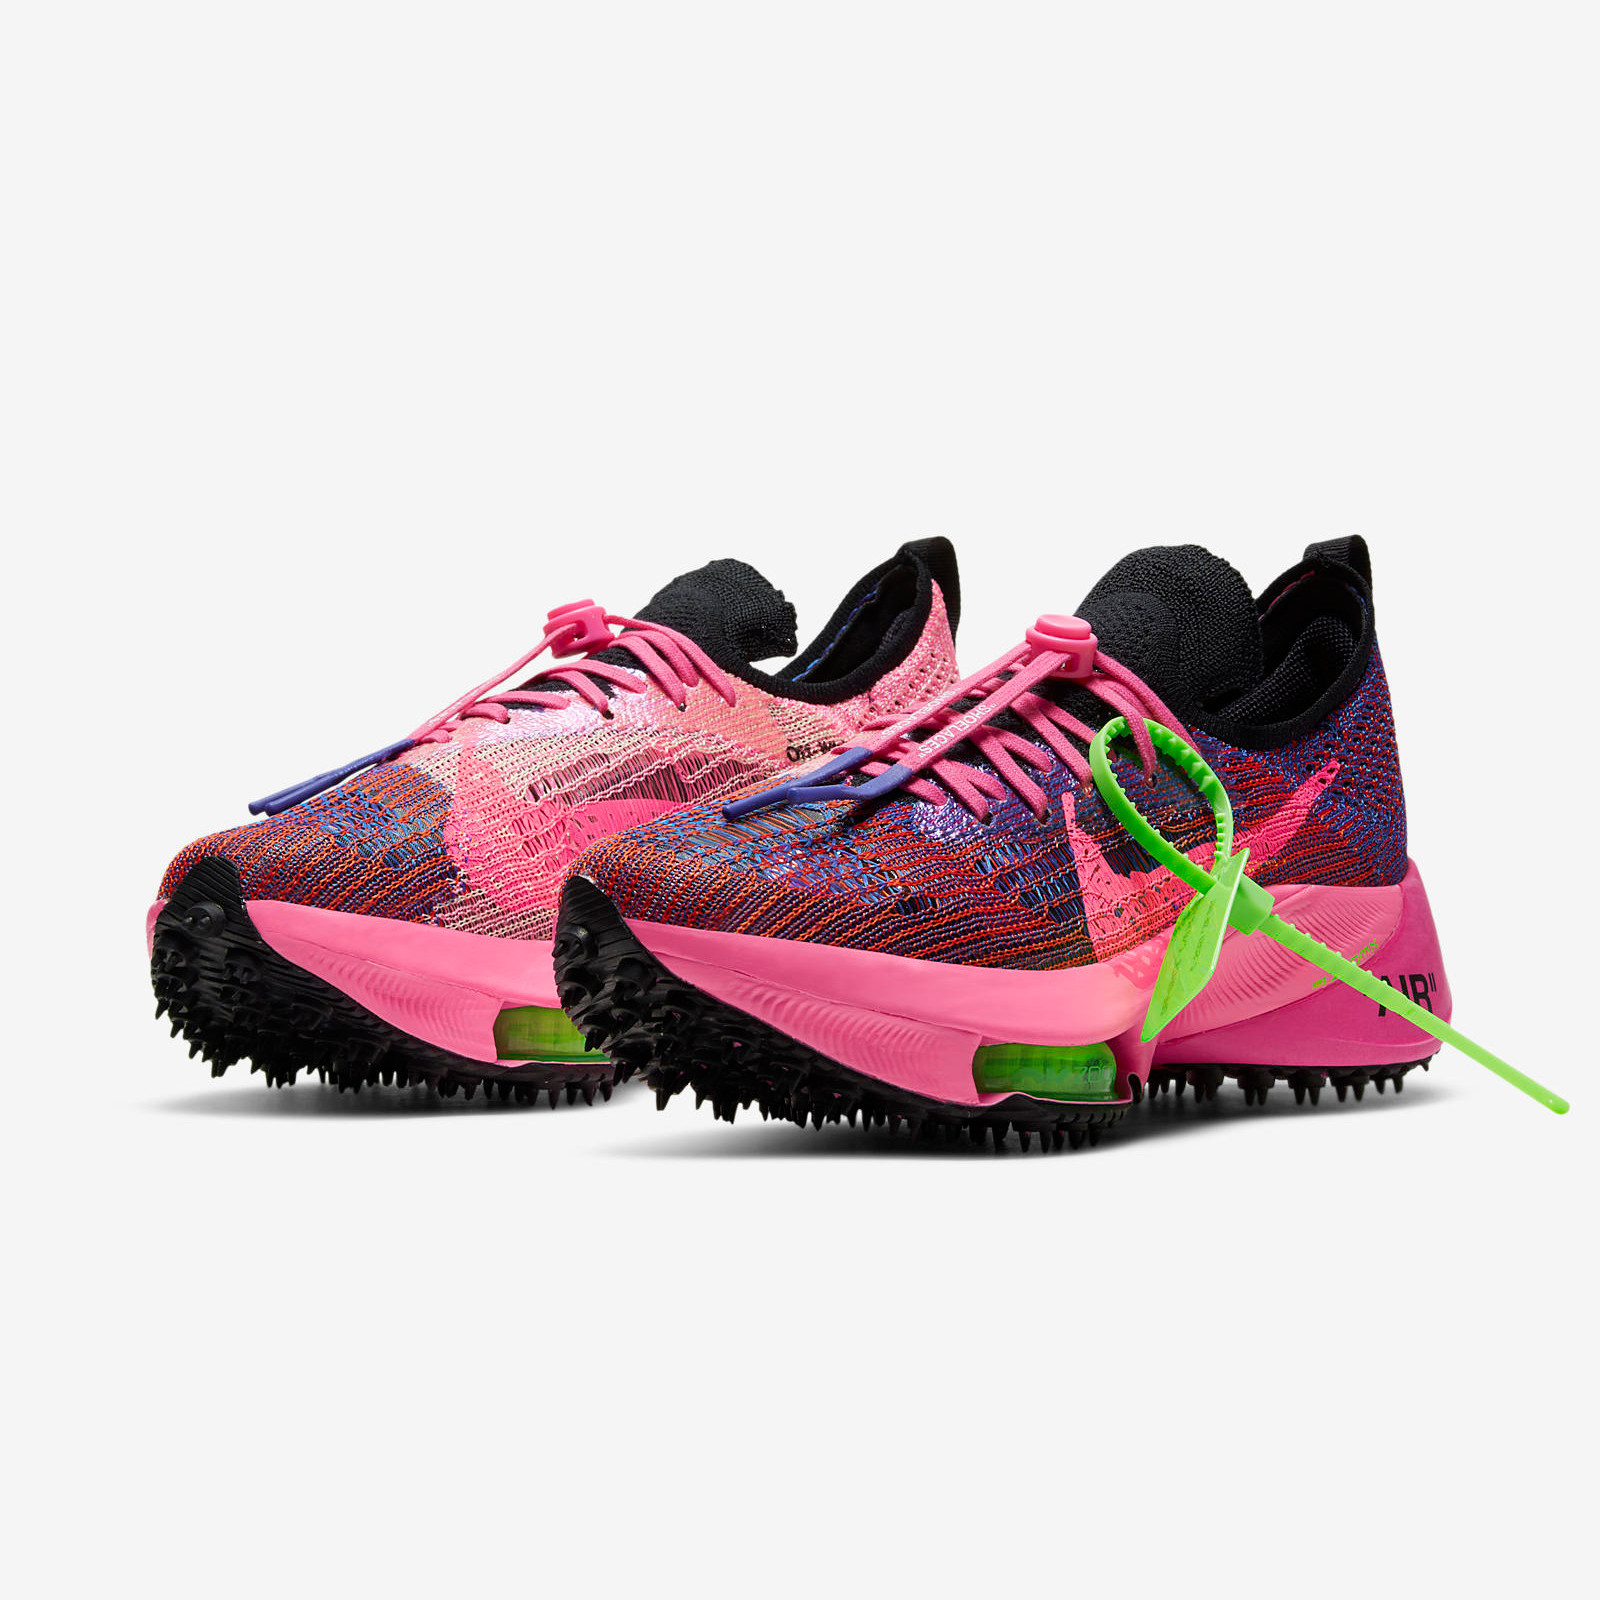 Off-White x Nike
Air Zoom Tempo
NEXT% Pink